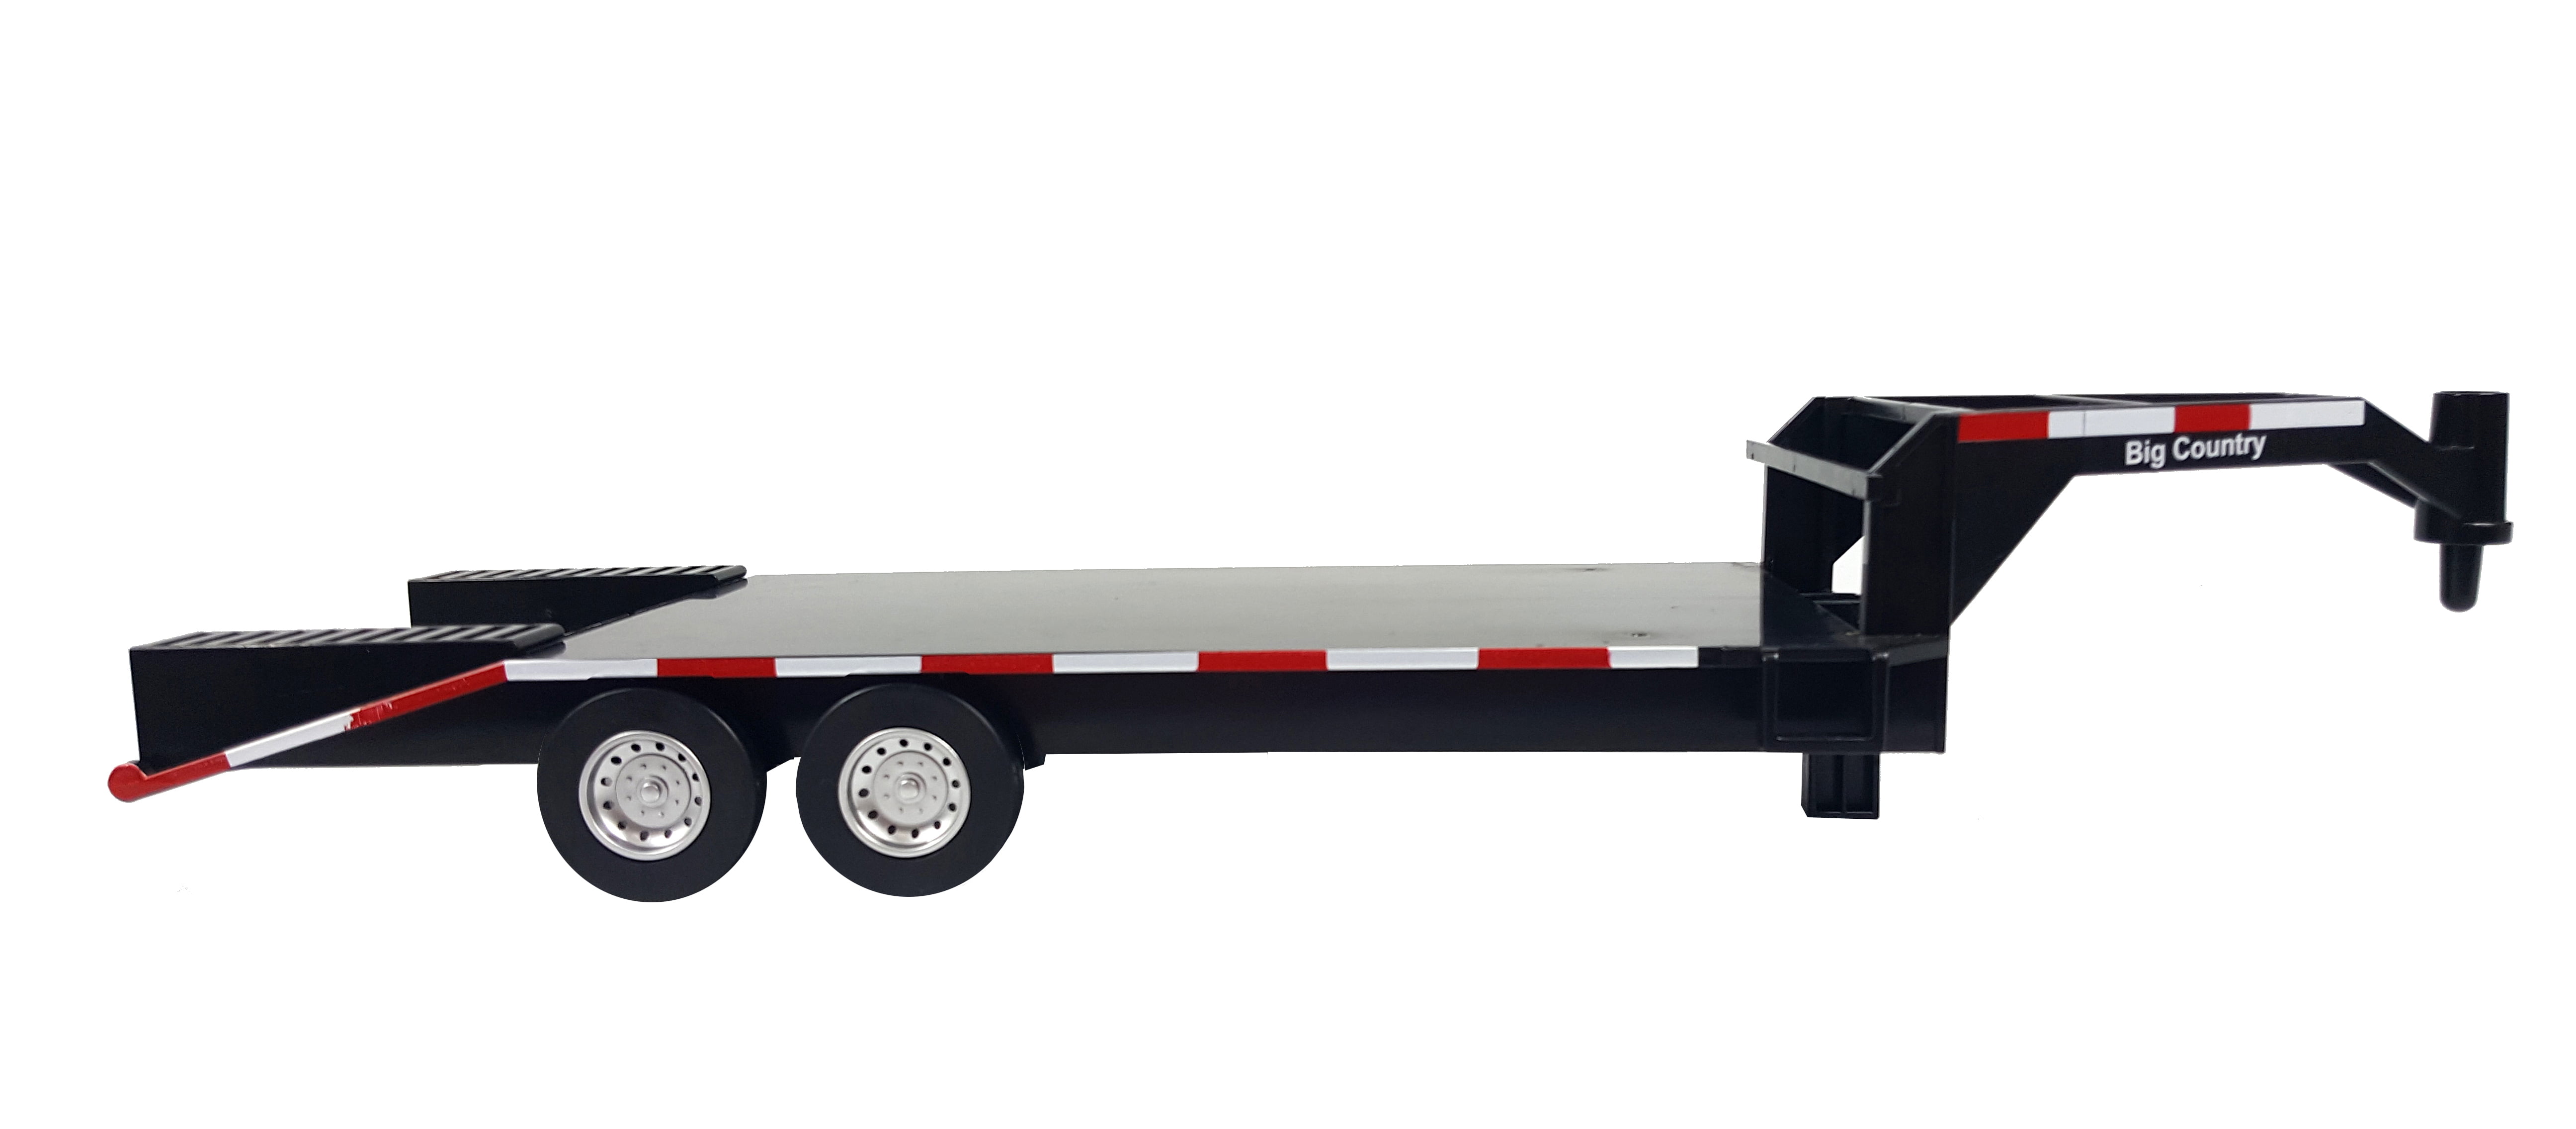 Flatbed Trailer Trucks Toy Alloy Flatbed Gooseneck Trailer with Ramps Scani...